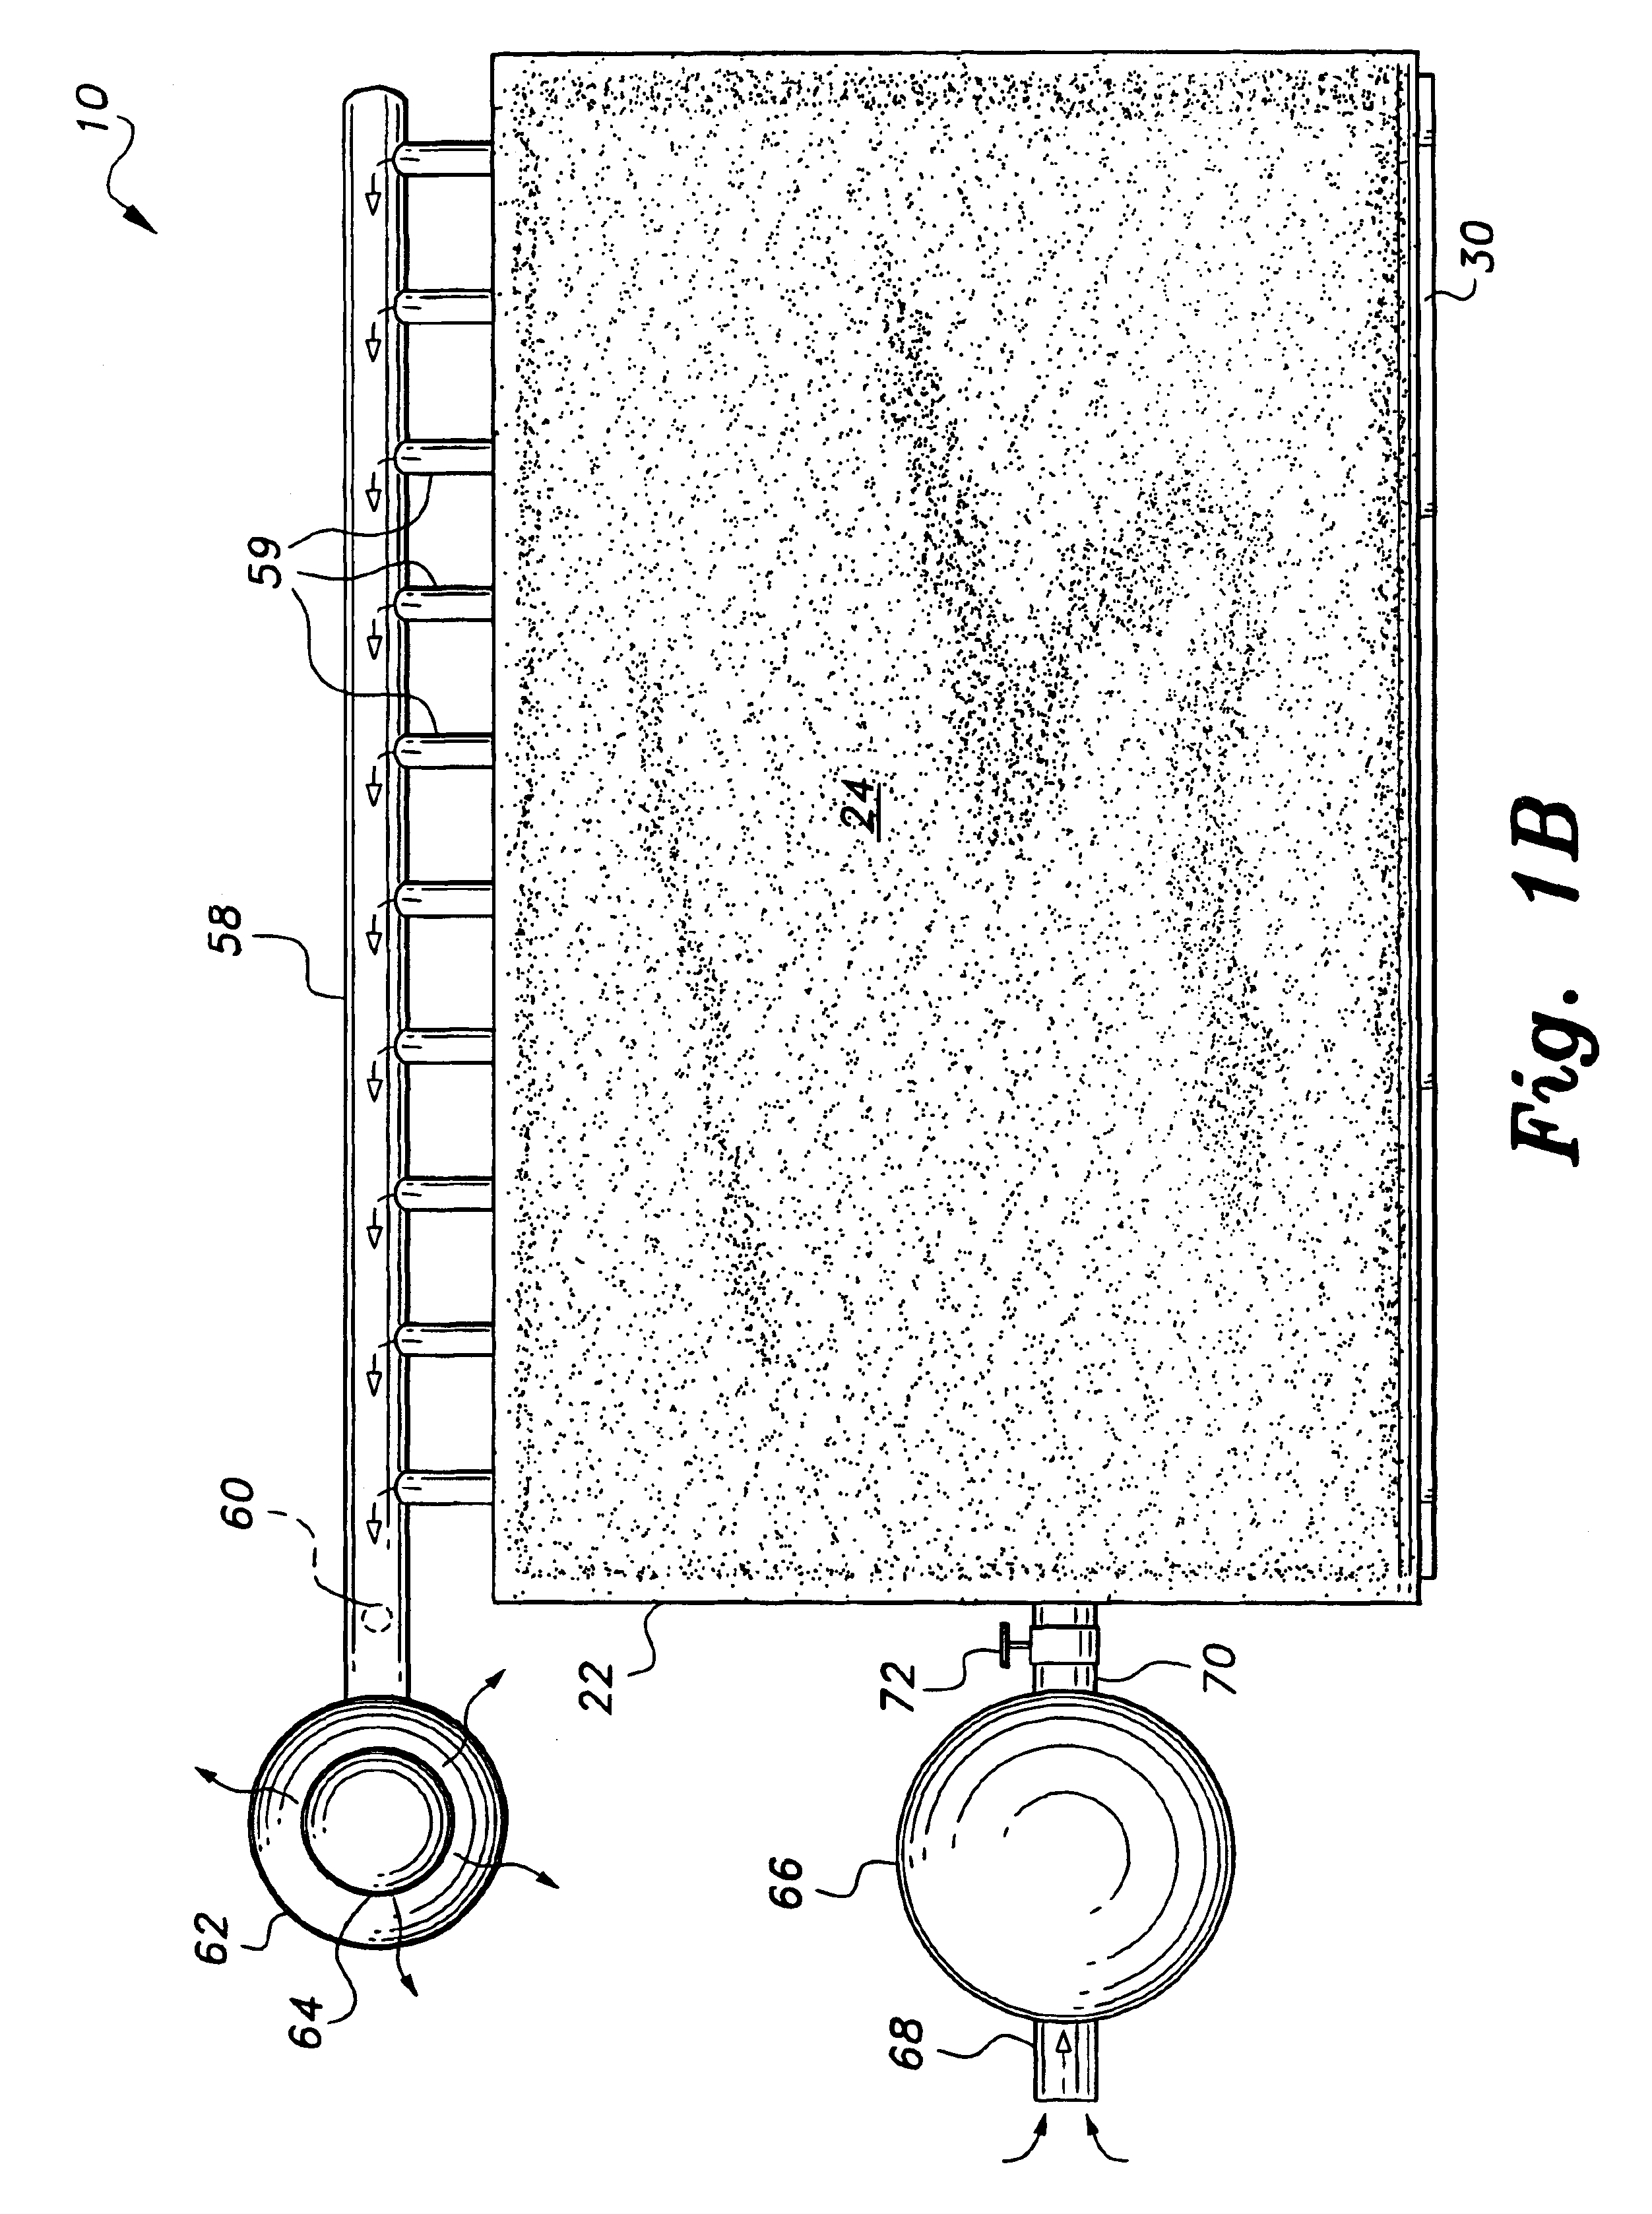 Vacuum lumber drying kiln with collapsing cover and method of use